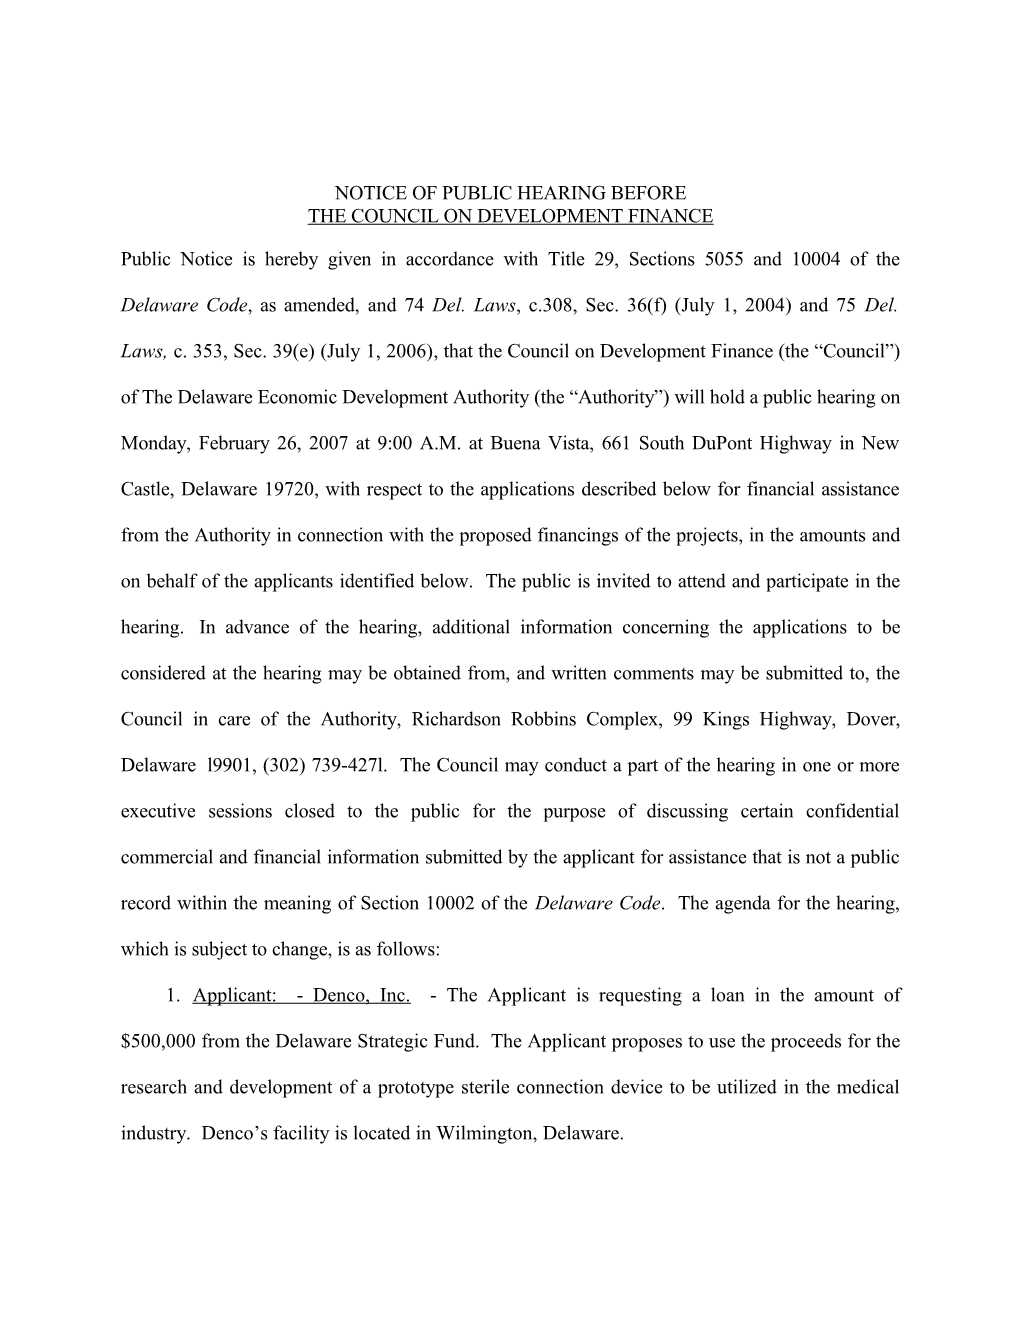 Notice of Public Hearing Before